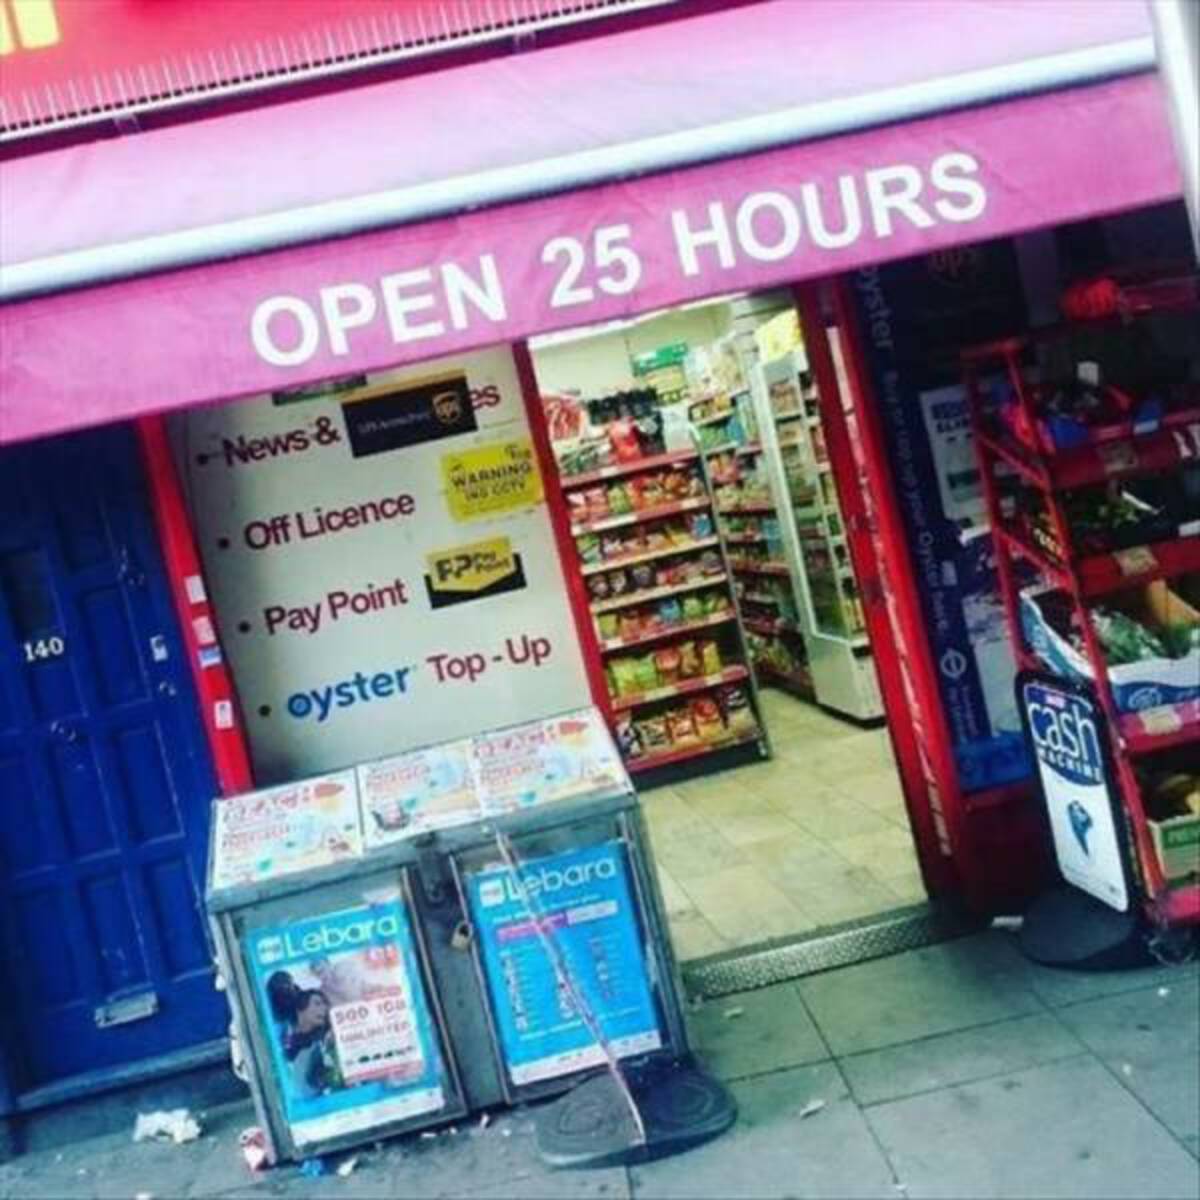 25 hours a day 8 days a week - Open 25 Hours News & es Off Licence 140 4 Pay Point Warning Fpr oyster TopUp Lebara Lebara 500 108 ups Oyster r top sp your Oyster have cash Achine